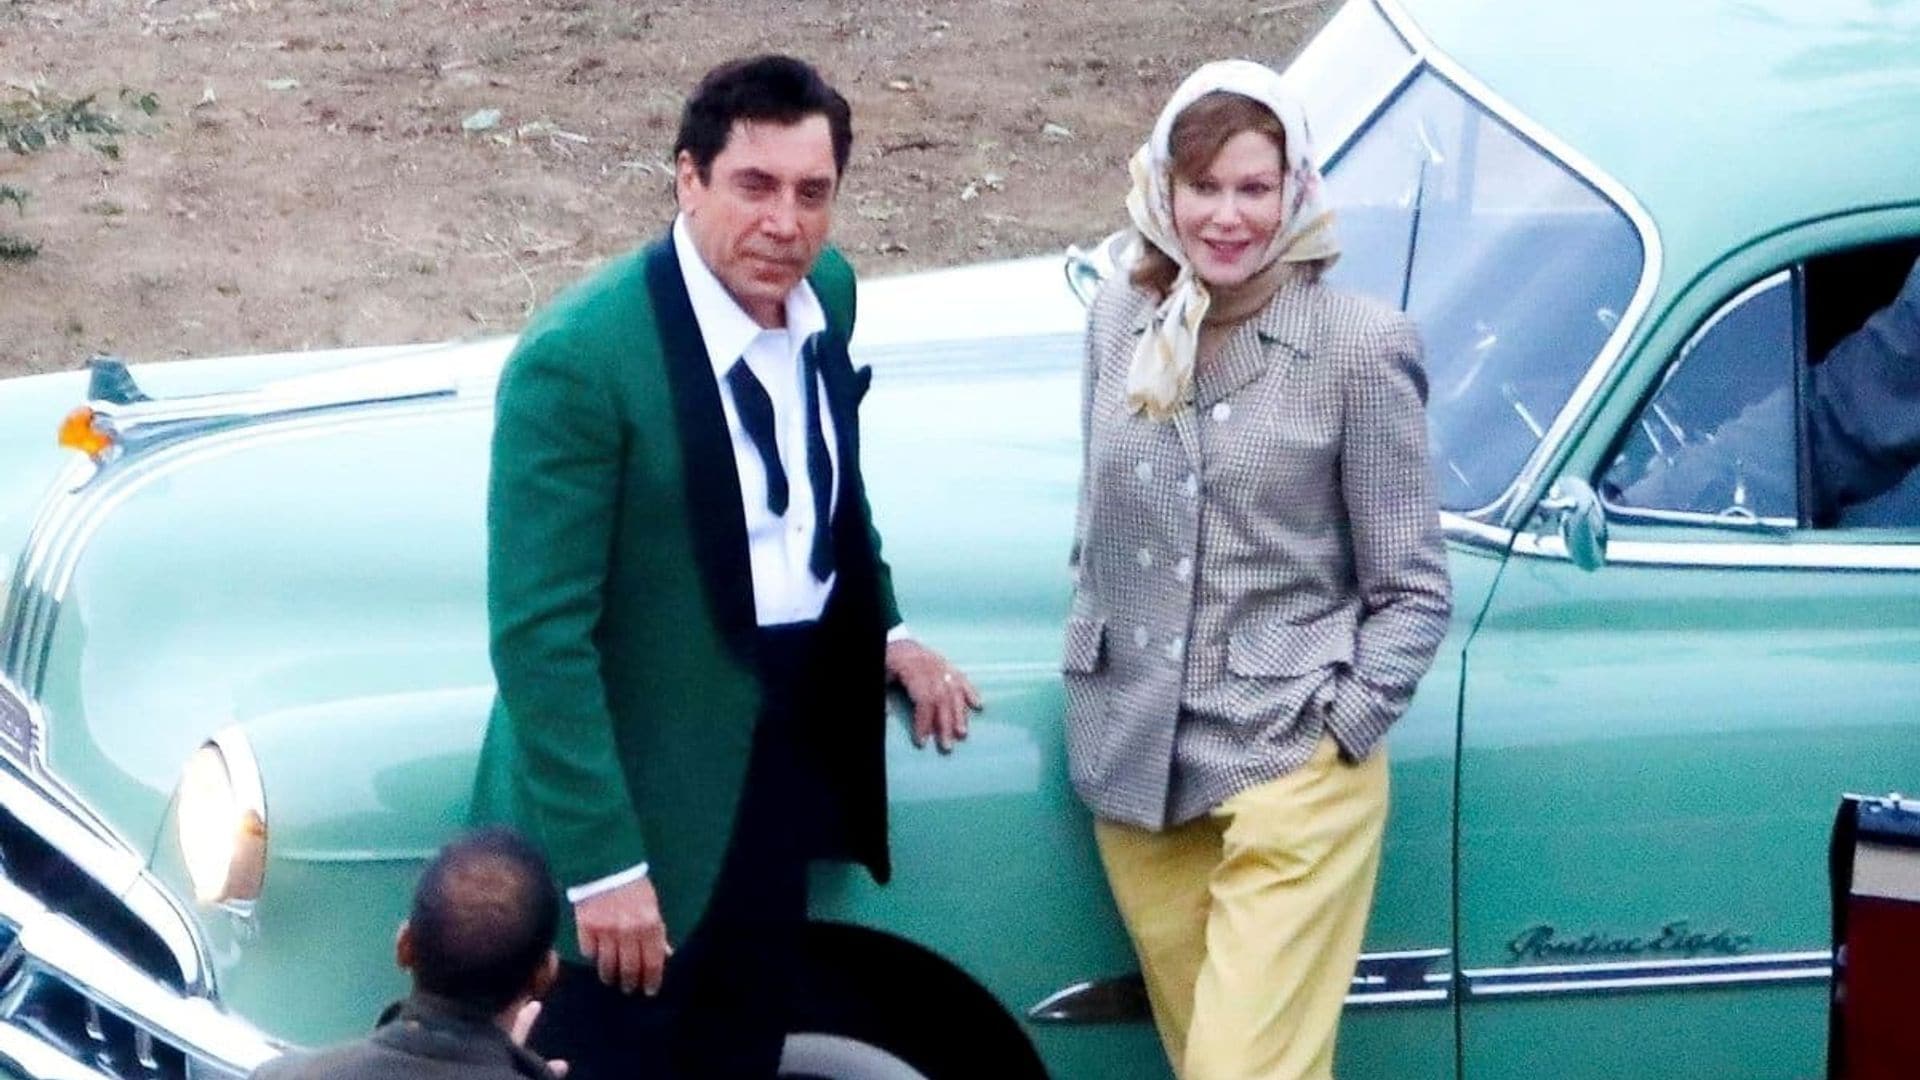 Here are new photos of Nicole Kidman and Javier Bardem filming ‘Being the Ricardos’